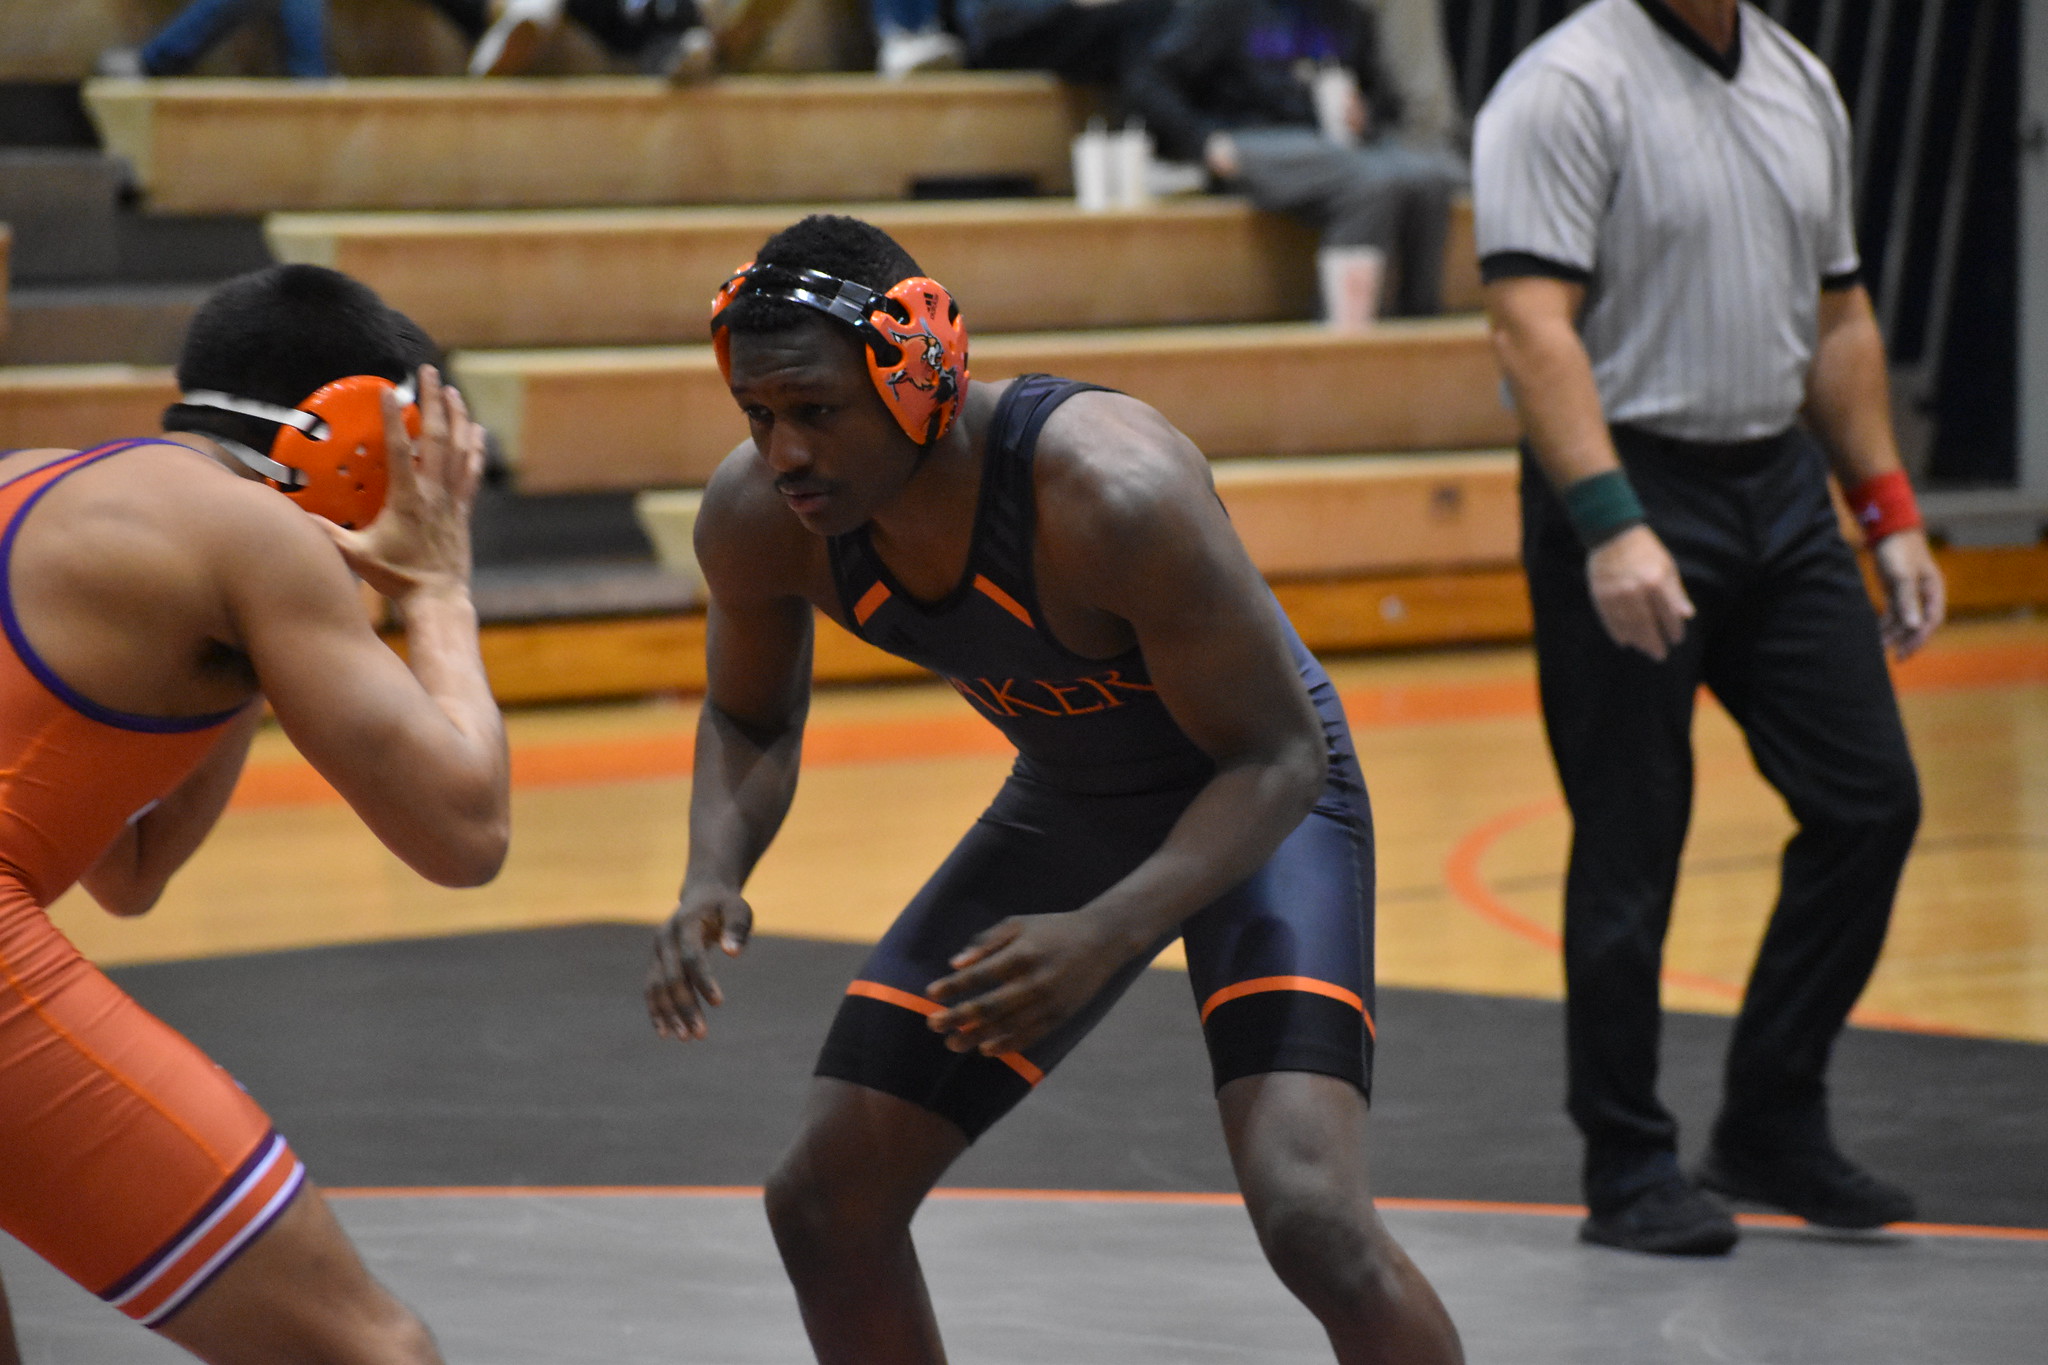 Wildcats Fall to No. 14 Missouri Valley, 36-13 in Conference Road Dual